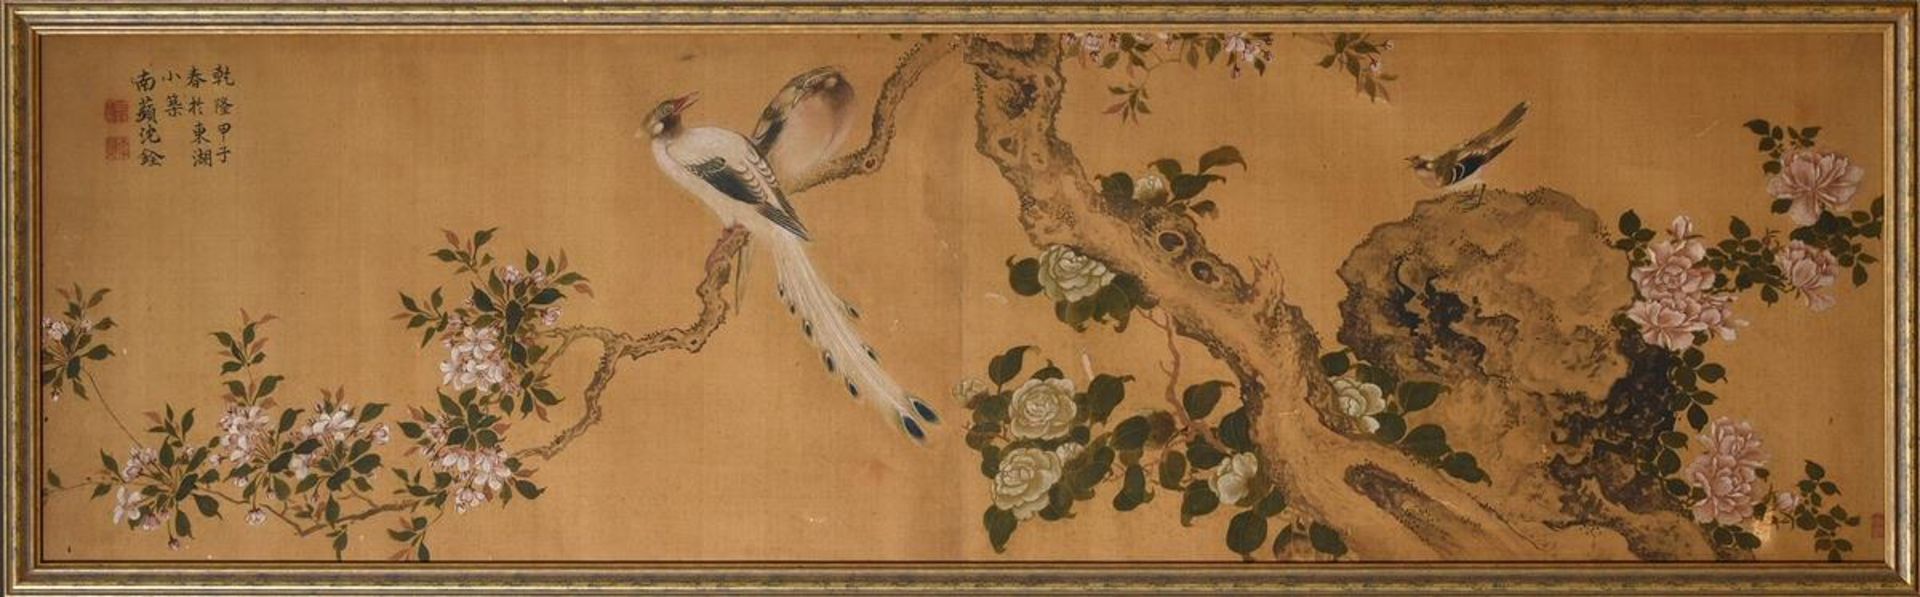 Chinese Huaniaohua painting "Paradise Birds and Flowering Branches", gouache and ink on silk, lands